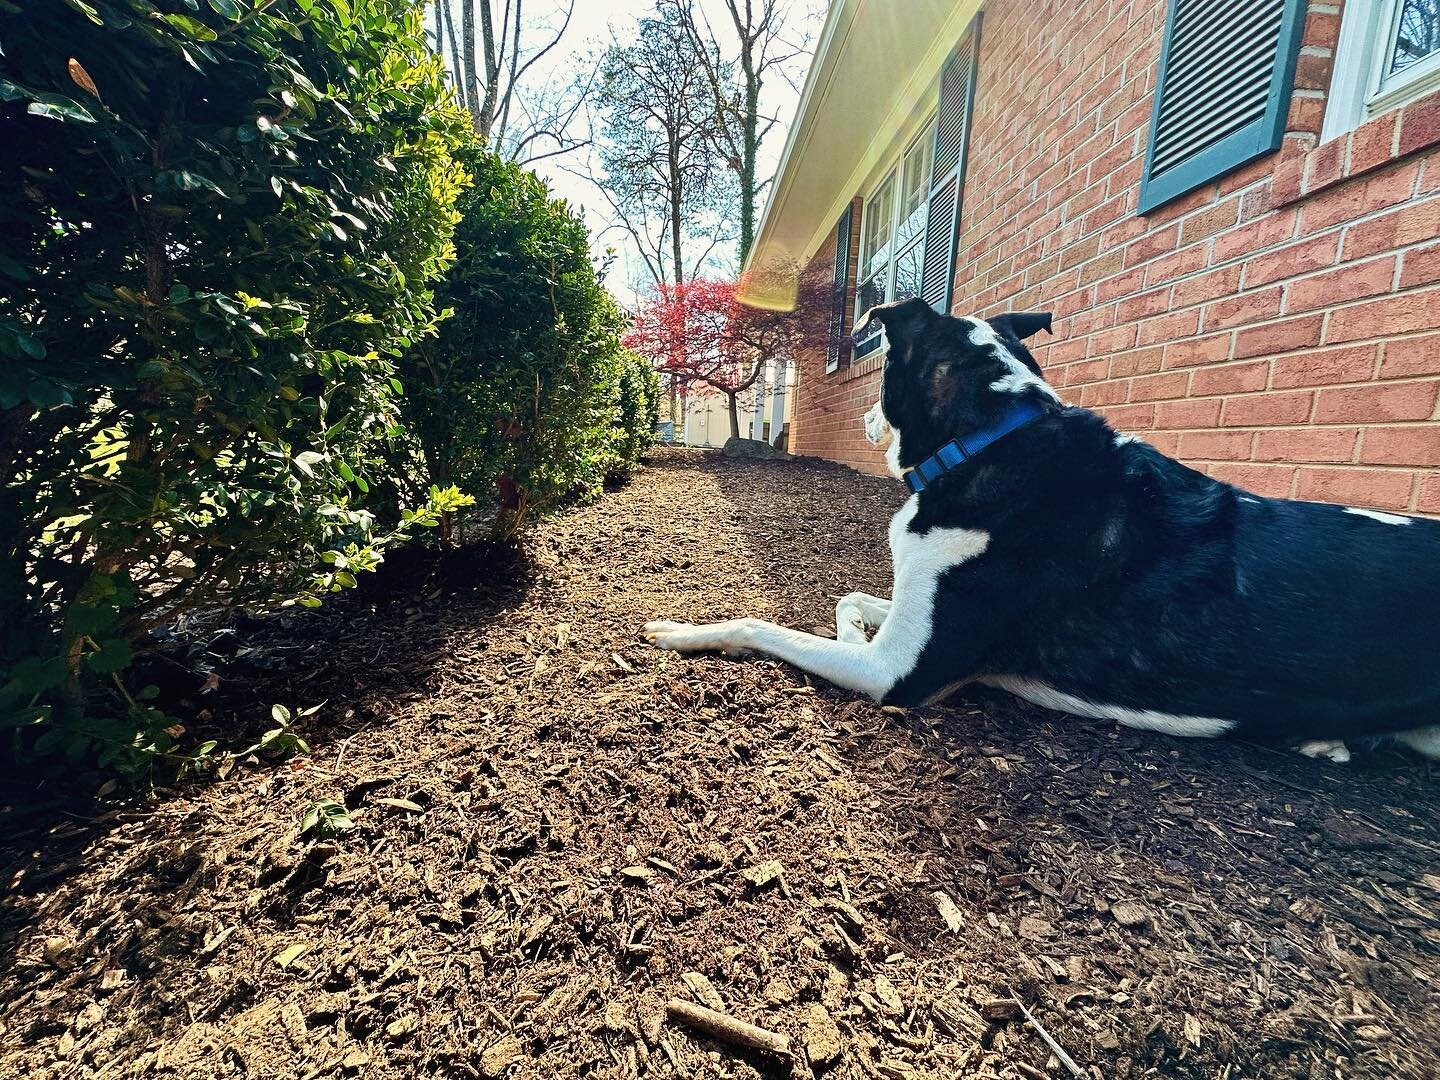 Another satisfied Chip Mulch customer! Our Chip Mulch is only available for a limited time and is priced to move. The results speak for themselves, so get your order in now! On-site pickup or local delivery available. #organicsrecycling #mulch #feedy